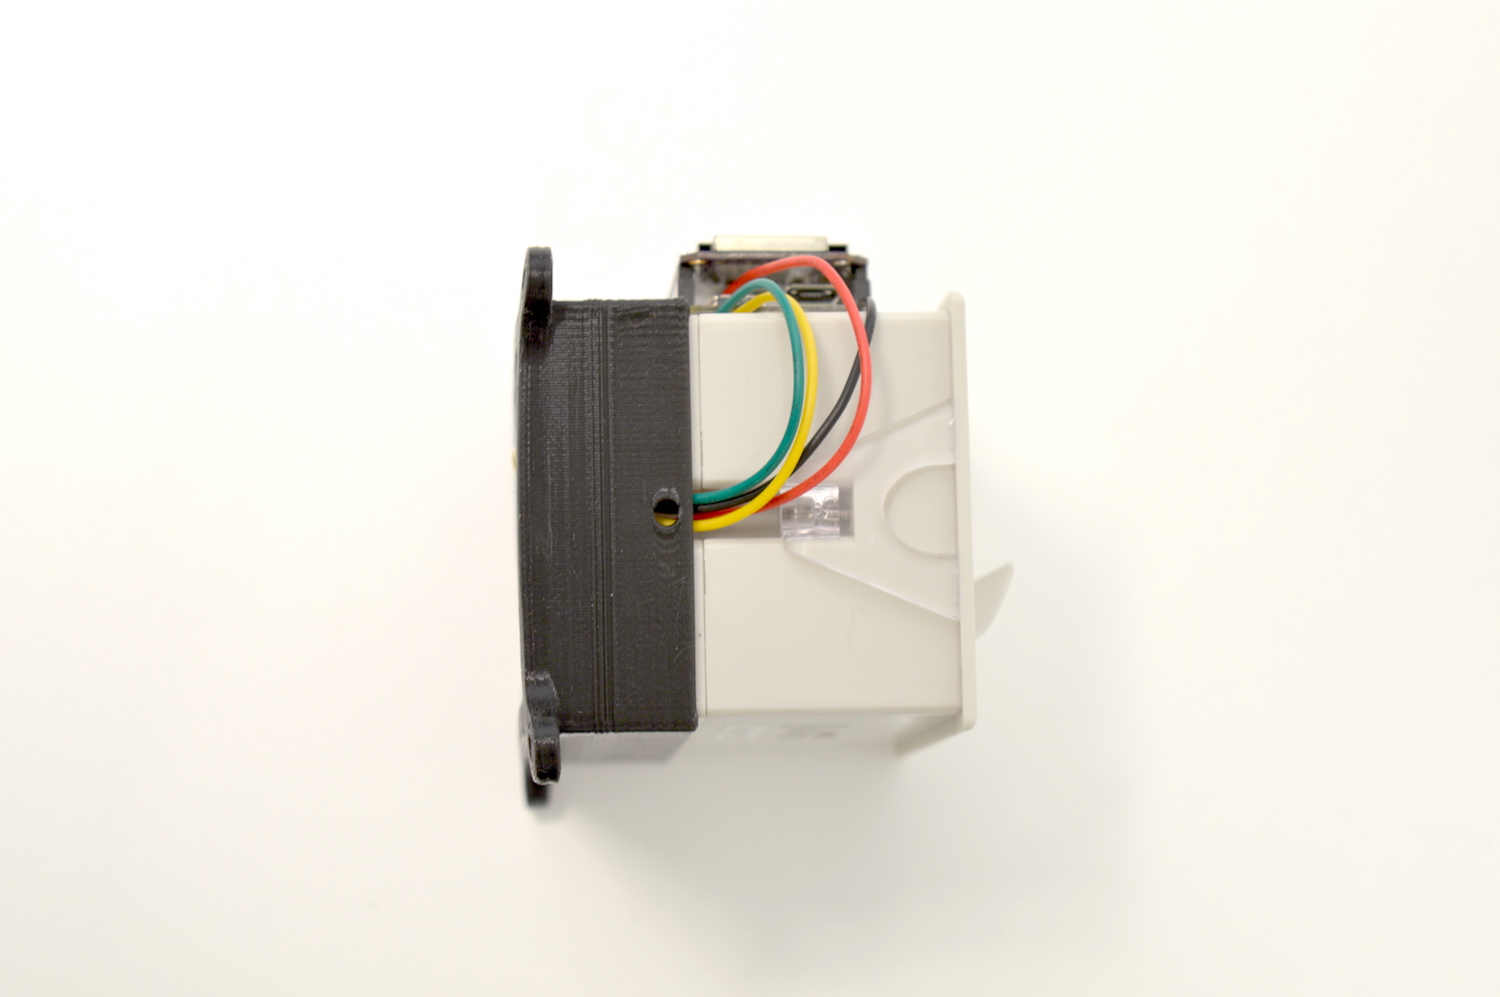 Thermal printer 5pin cable routing